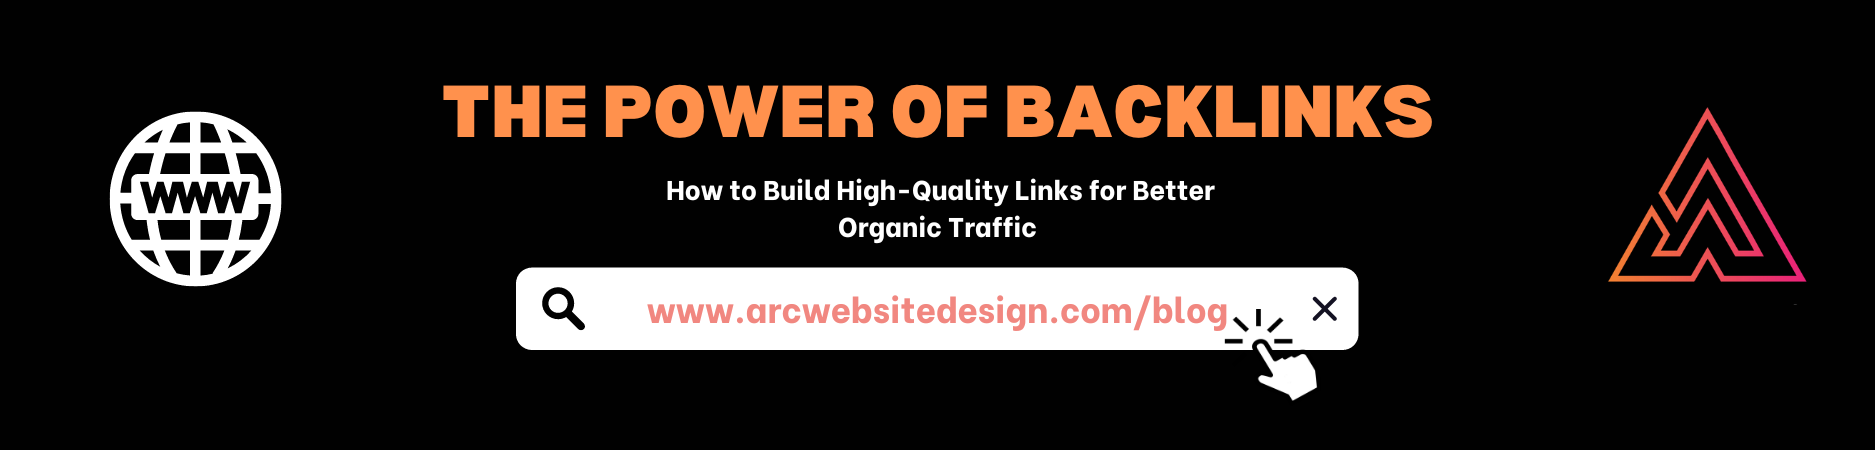 How to Build High-Quality Links for Better Organic Traffic